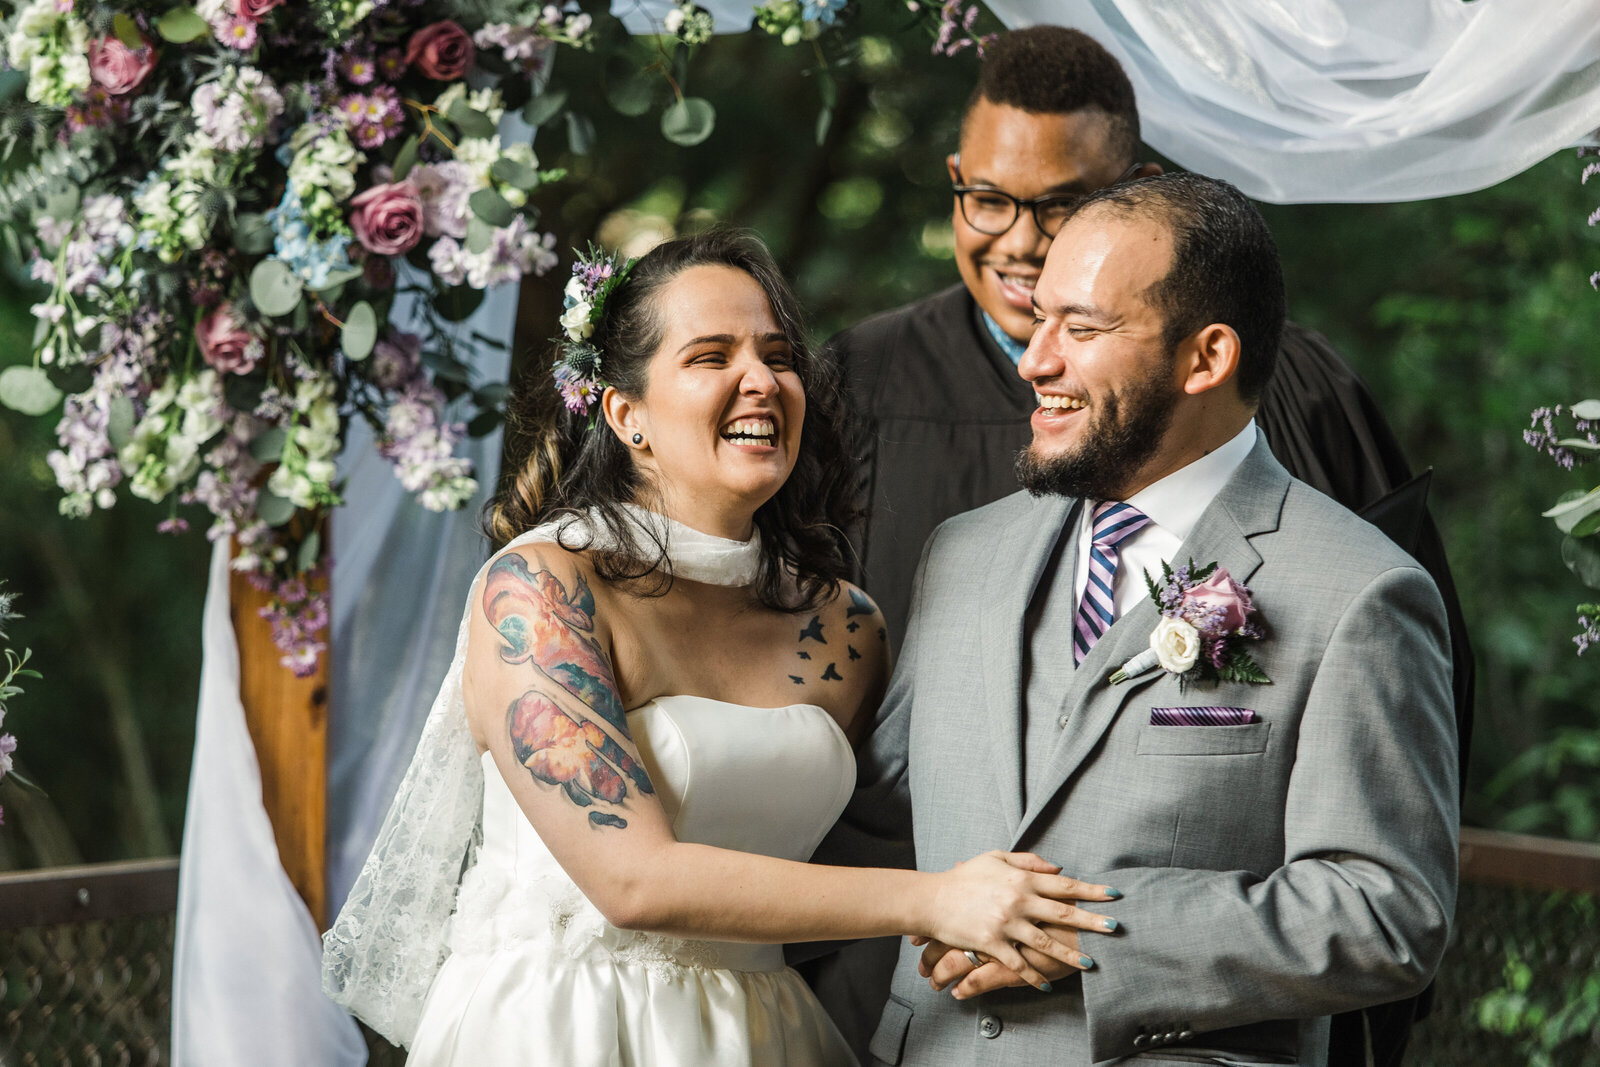 A newlywed couple smiles and laughs after being announced as husband and wife. They are standing in front of an altar with lush purple flowers and white draping. Their officiant is a tall African American man with glasses, and he's smiling. The bride is on the left wearing a bridal cape around her neck that goes down her back. She has a tattoo of a galaxy on her right arm, and is wearing a strapless dress. Her hand is touching the groom's hand. The groom is on the right side and he's wearing a grey suit with a purple tie and boutonniere.